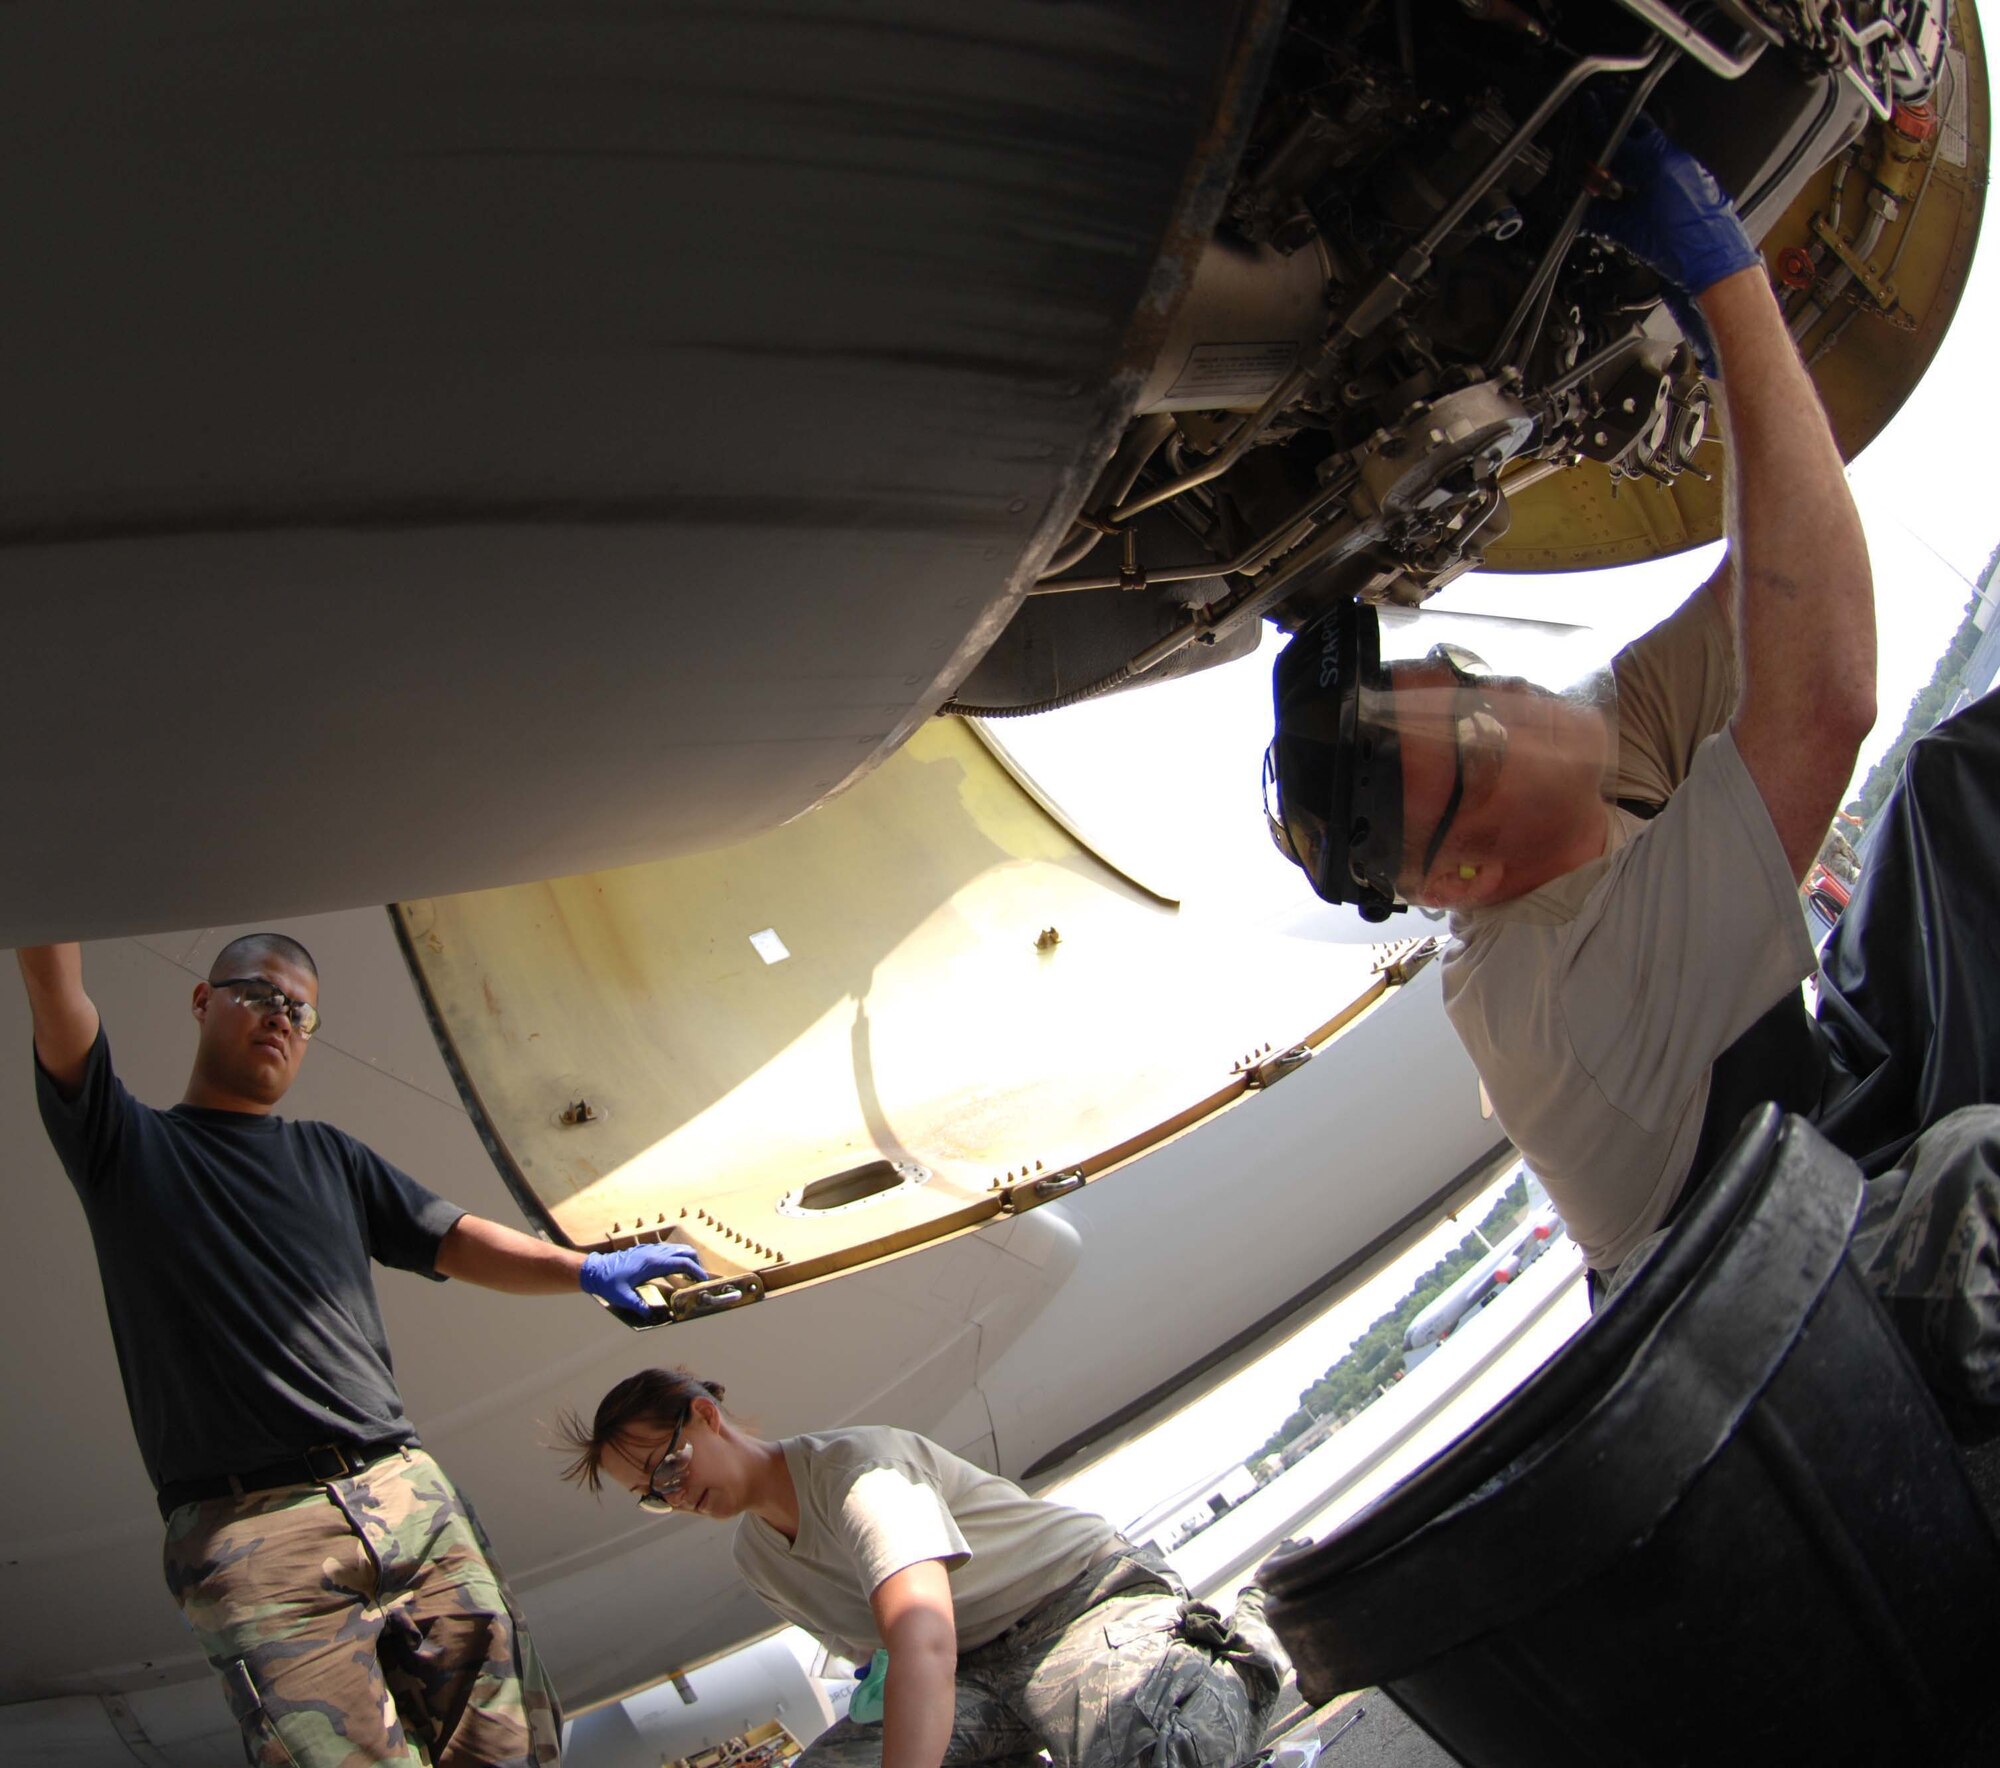 SEYMOUR JOHNSON AIR FORCE BASE, N.C. - Senior Airman Martin Quintanilla, Tech. Sgt. Amy Eveslage, and Staff Sgt. Timothy Anglin of the 916th Air Refueling Wing inspect and change a fuel filter on a KC-135R Stratotanker, June 23, 2008, Seymour Johnson Air Force Base, N.C. Fuel filter on the KC-135R must be serviced every 120 flying hours. (U.S. Air Force photo by Airman 1st Class Gino Reyes)